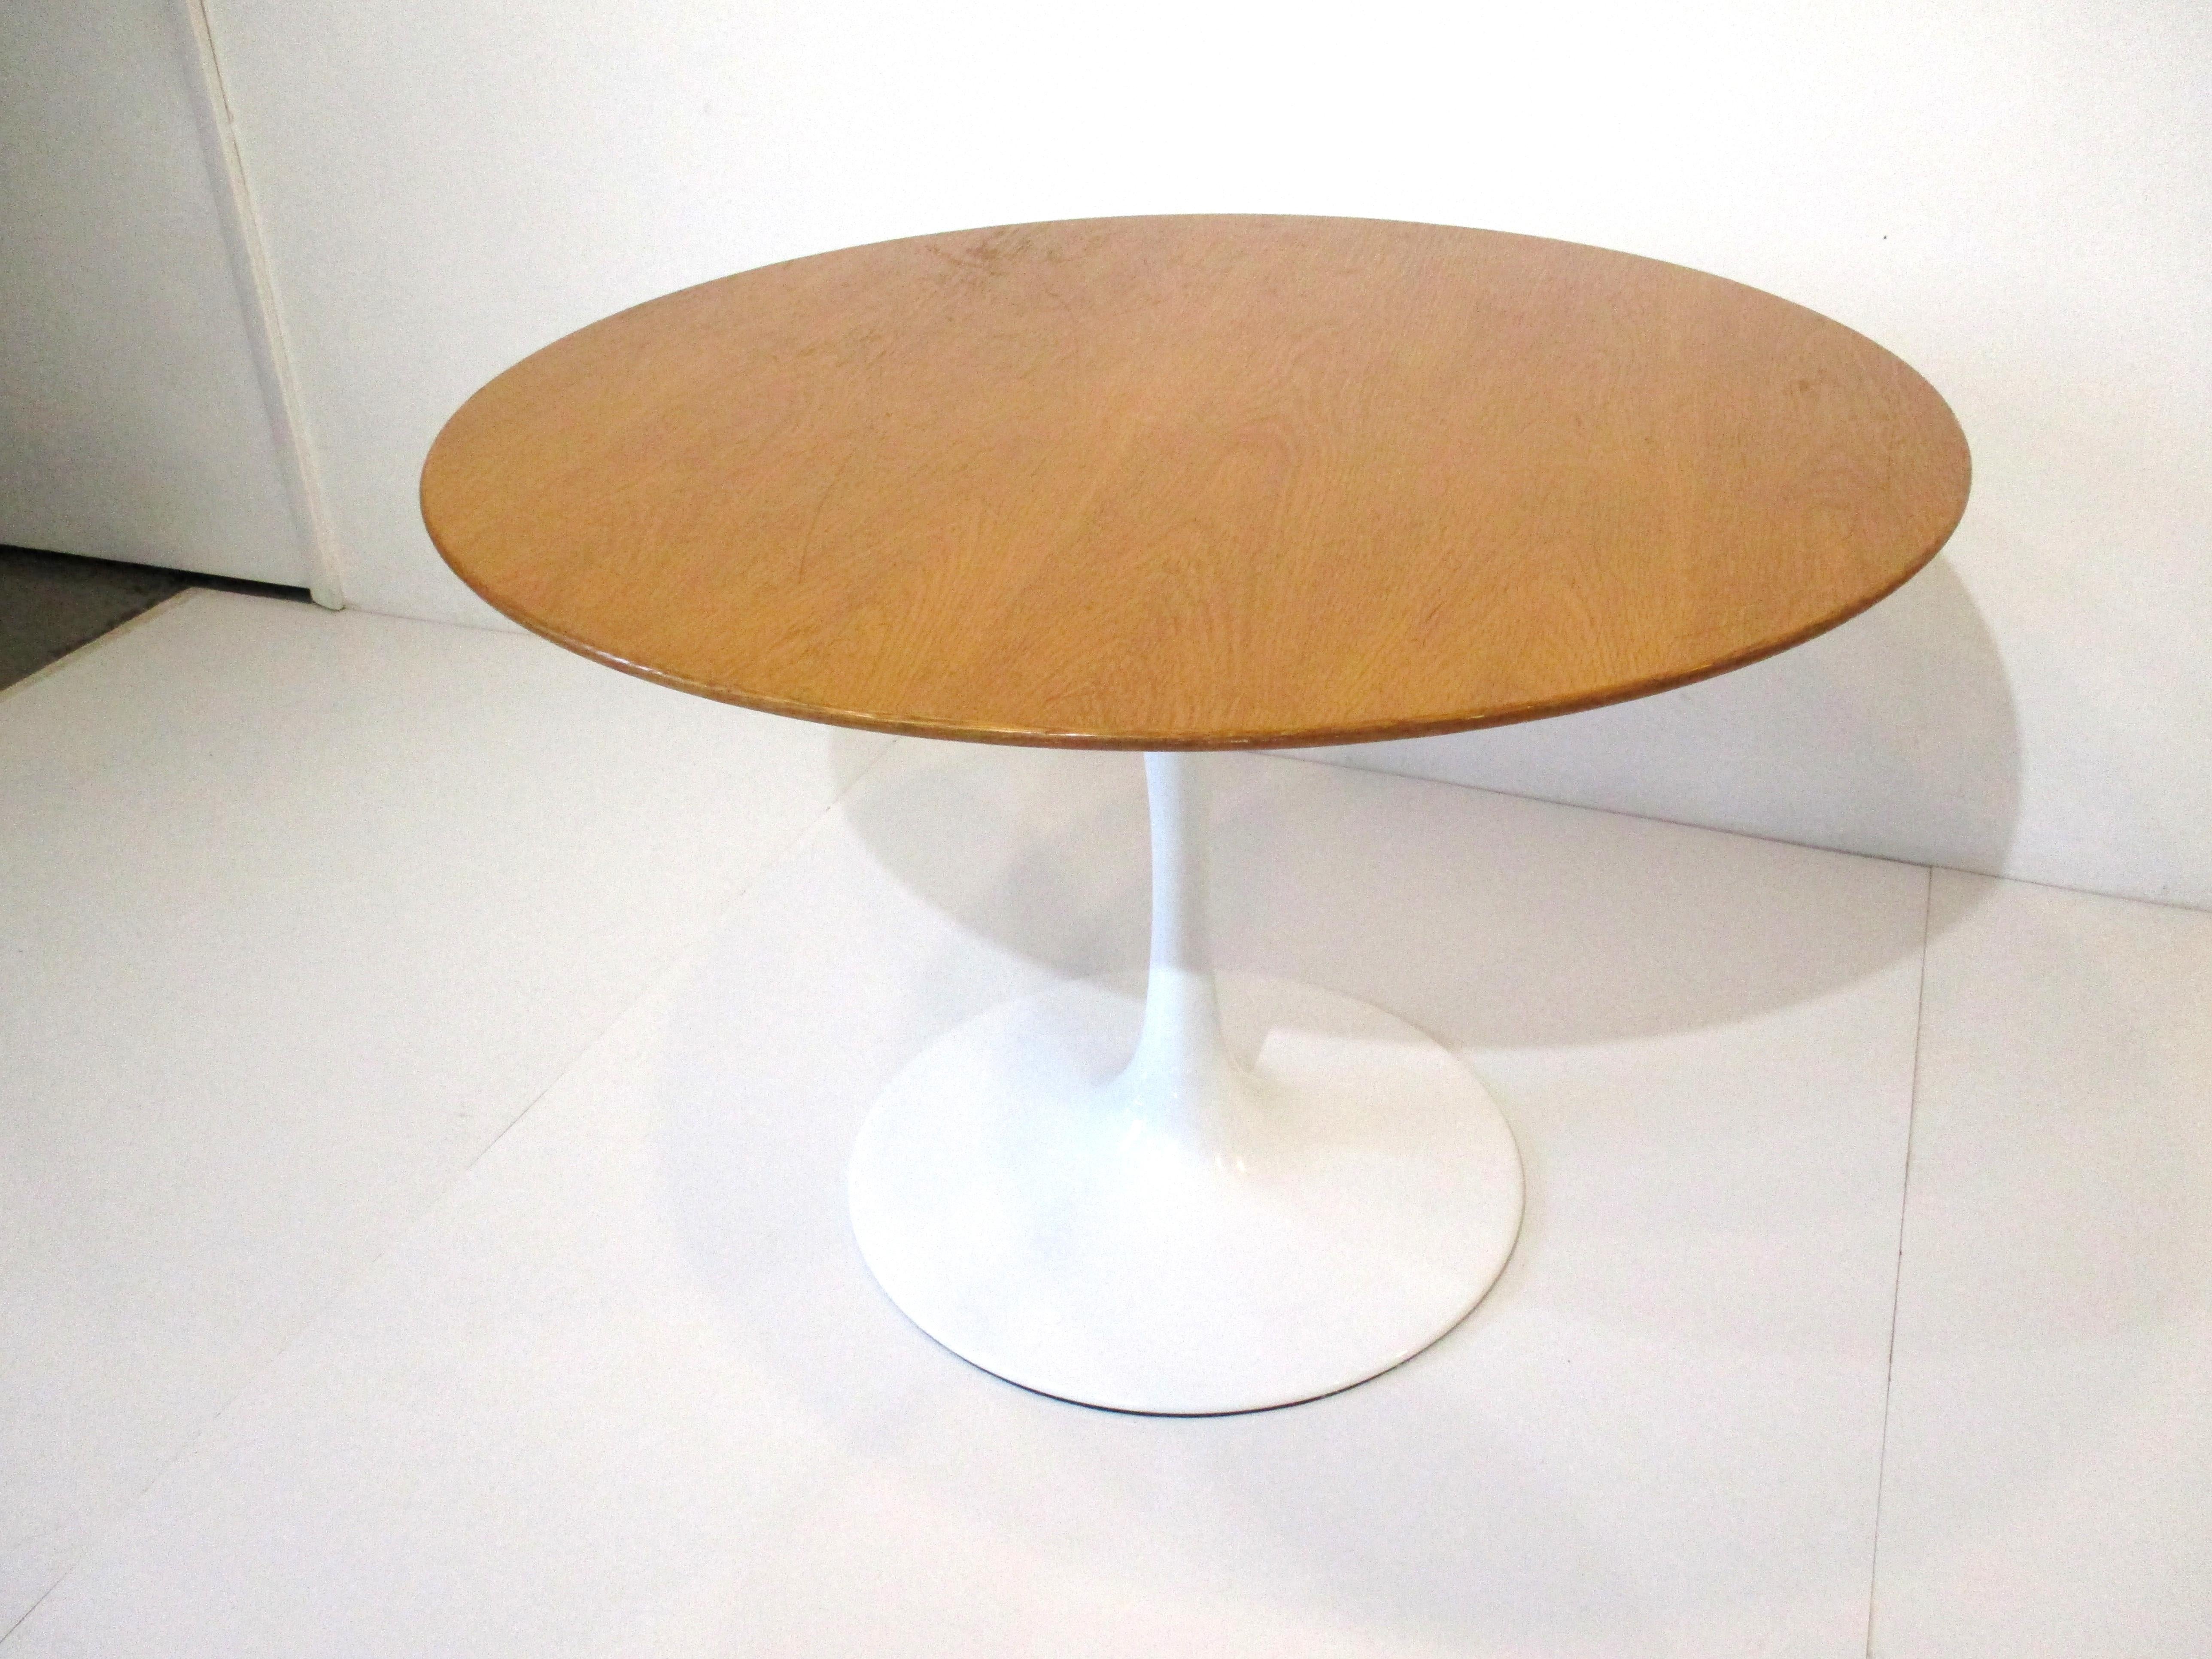 A nice sized Tulip dining or game table with American oak top on a glossy white steel tulip base . Retains the manufactures tag from Knoll International special ordered for the Weyerhaeuser Wood Company offices Tacoma, WA.